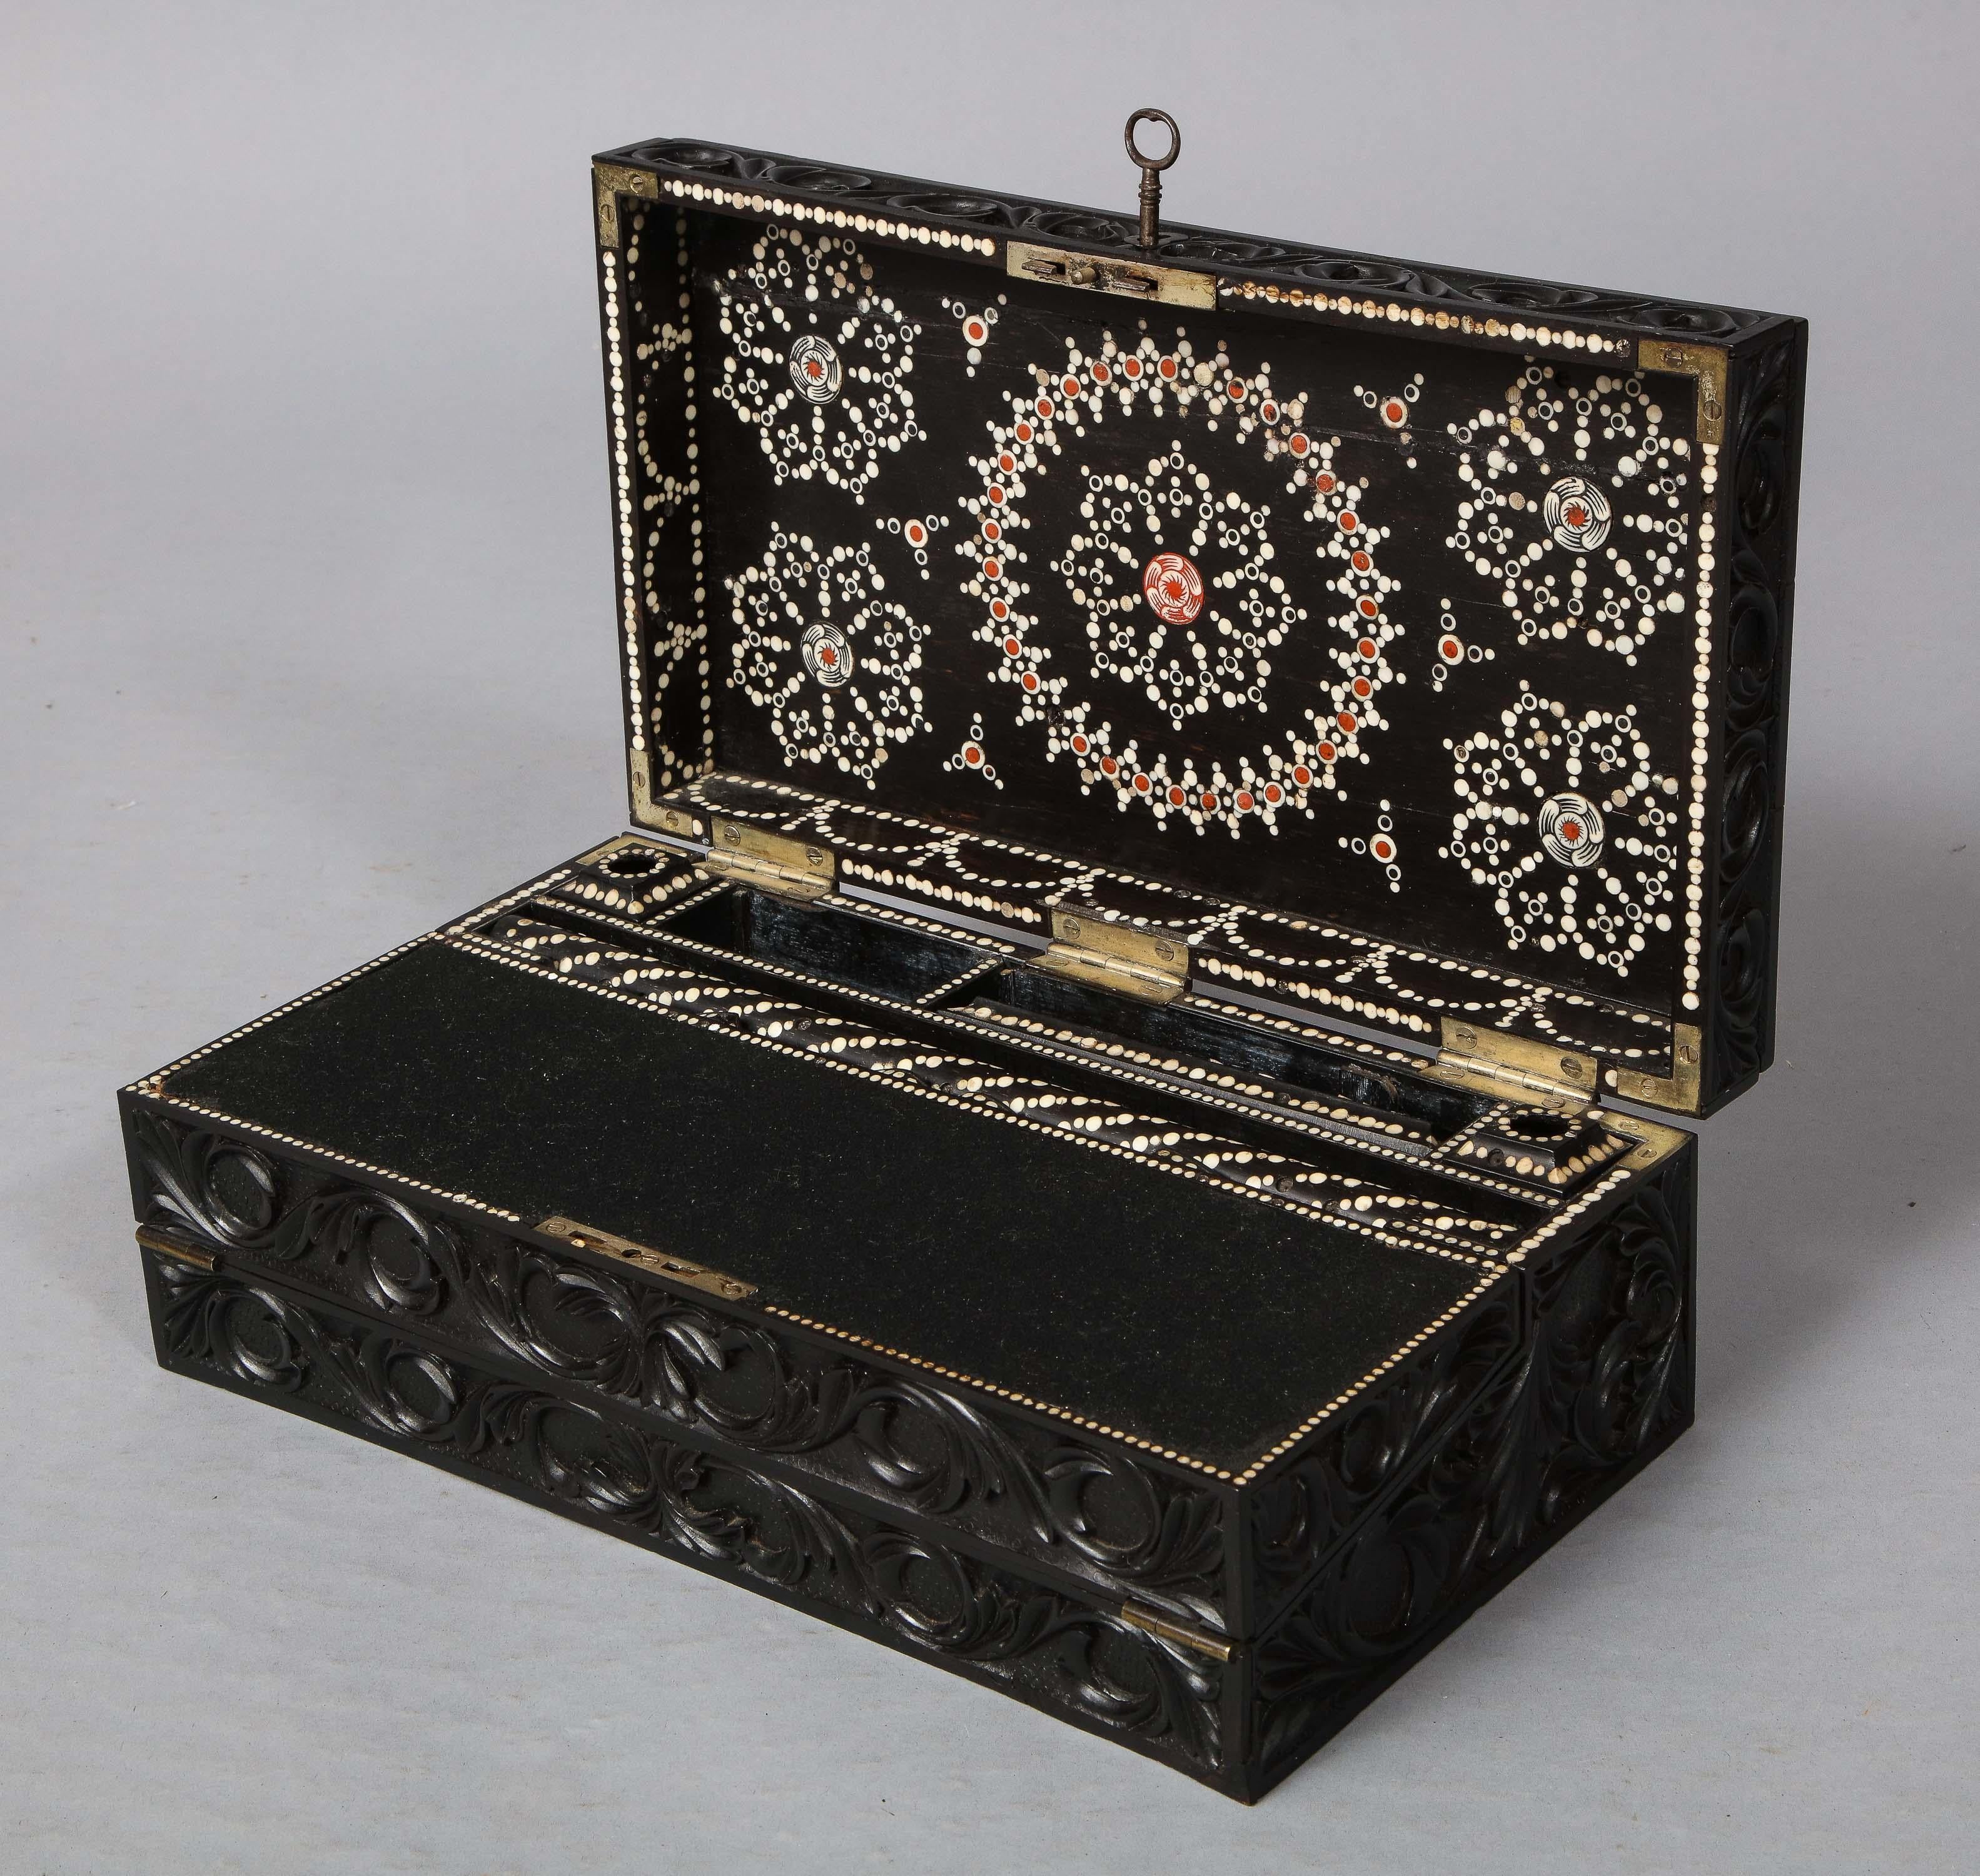 Very fine early 19th century carved ebony writing slope, the exterior richly carved with foliate decoration, the interior profusely inlaid with bone dots forming floral geometric patterns and fitted with inkwells, pen case, roller and secret spring